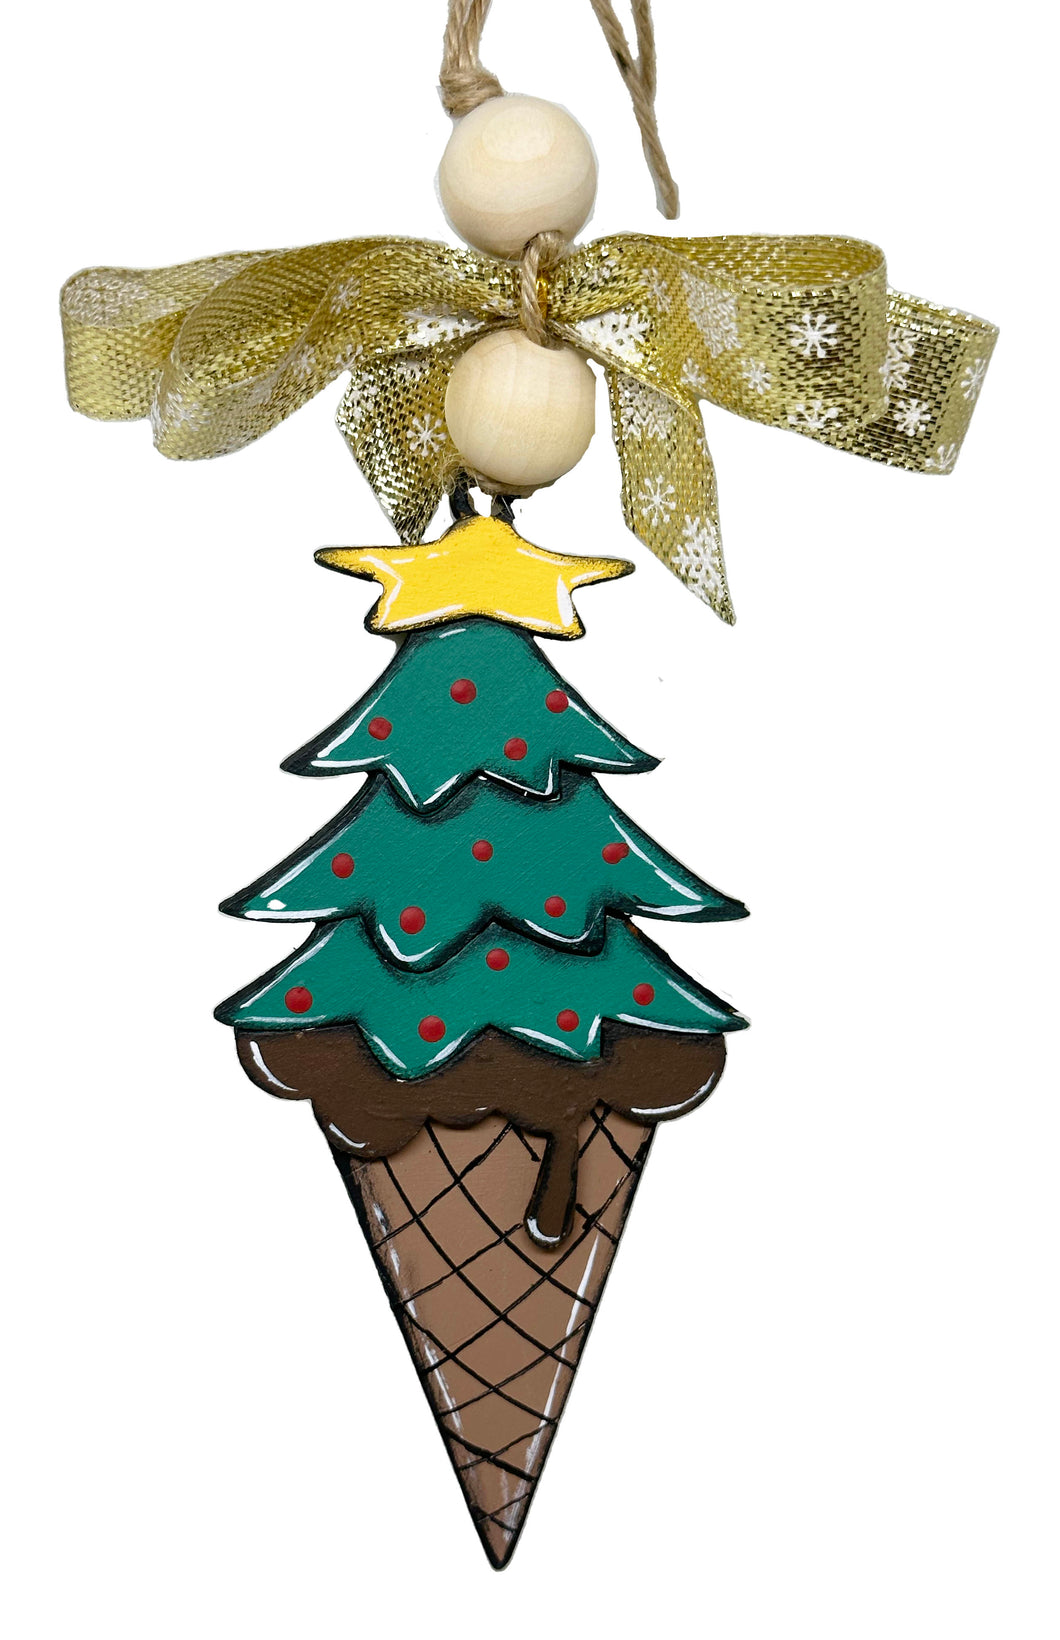 Ball in the shape of an ice cream cone with tree and ribbon